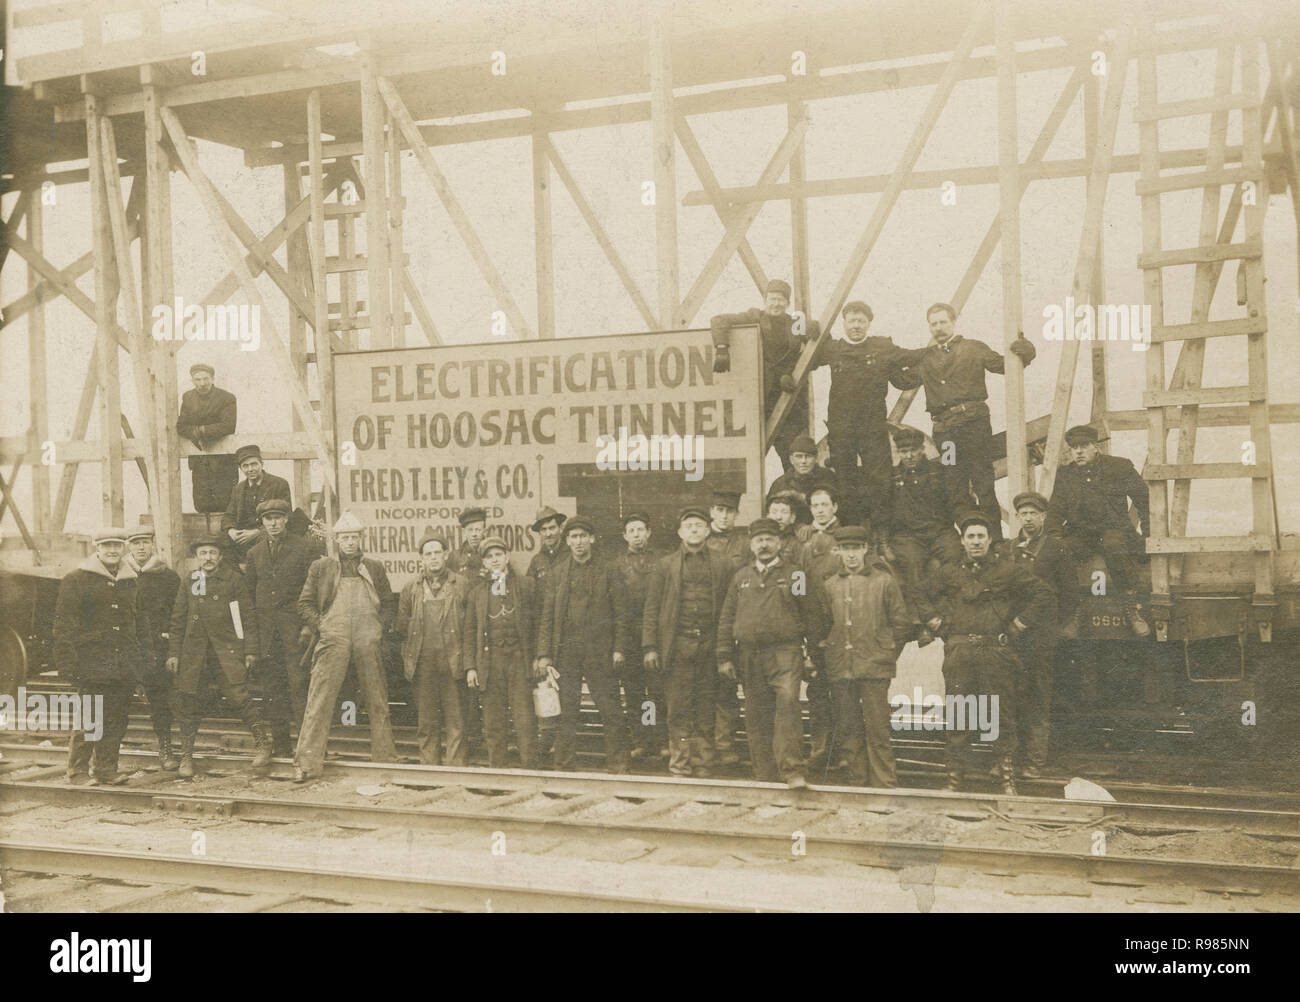 Antique c1911 photograph, work crew for the electrification of the Hoosac Tunnel. The Hoosac Tunnel is a 4.75-mile (7.64 km) active railroad tunnel in western Massachusetts that passes through the Hoosac Range, an extension of Vermont's Green Mountains. It runs in a straight line from its east portal, along the Deerfield River in the town of Florida, to its west portal in the city of North Adams. SOURCE: ORIGINAL PHOTOGRAPH. Stock Photo